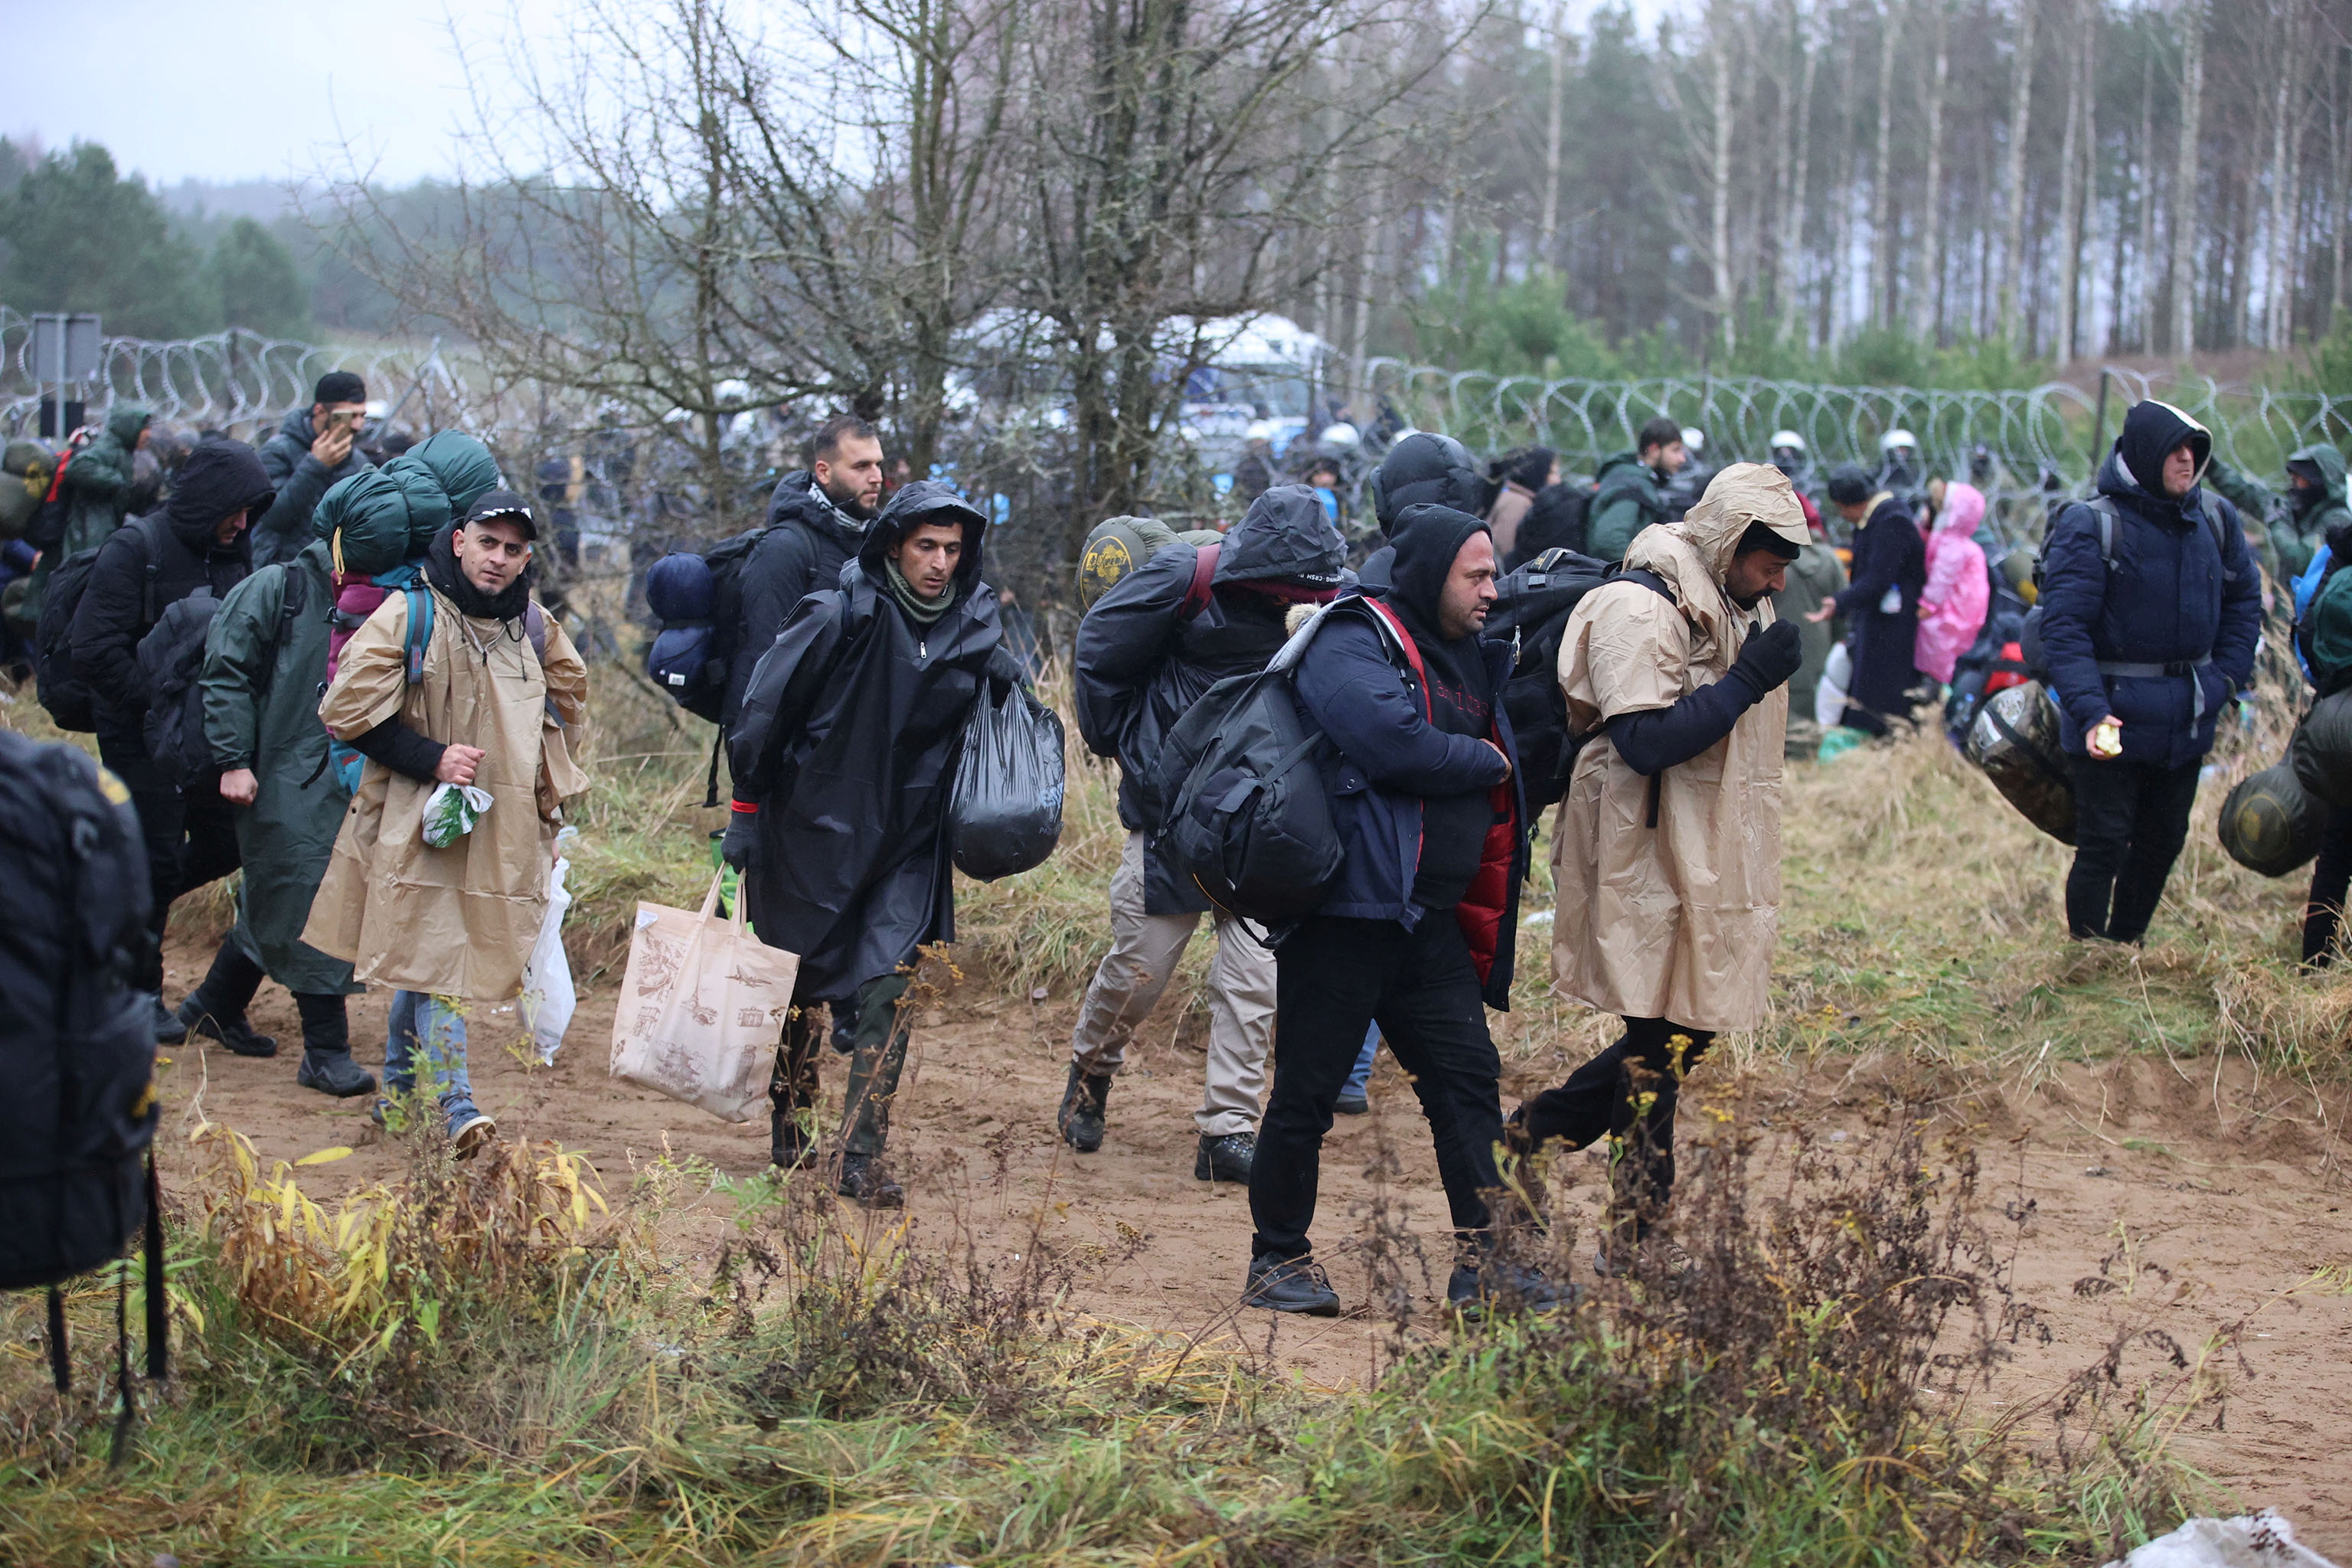 Migrants gather near a barbed wire fence in an attempt to cross the border with Poland in the Grodno region, Belarus November 8, 2021. Leonid Scheglov/BelTA/Handout via REUTERS 